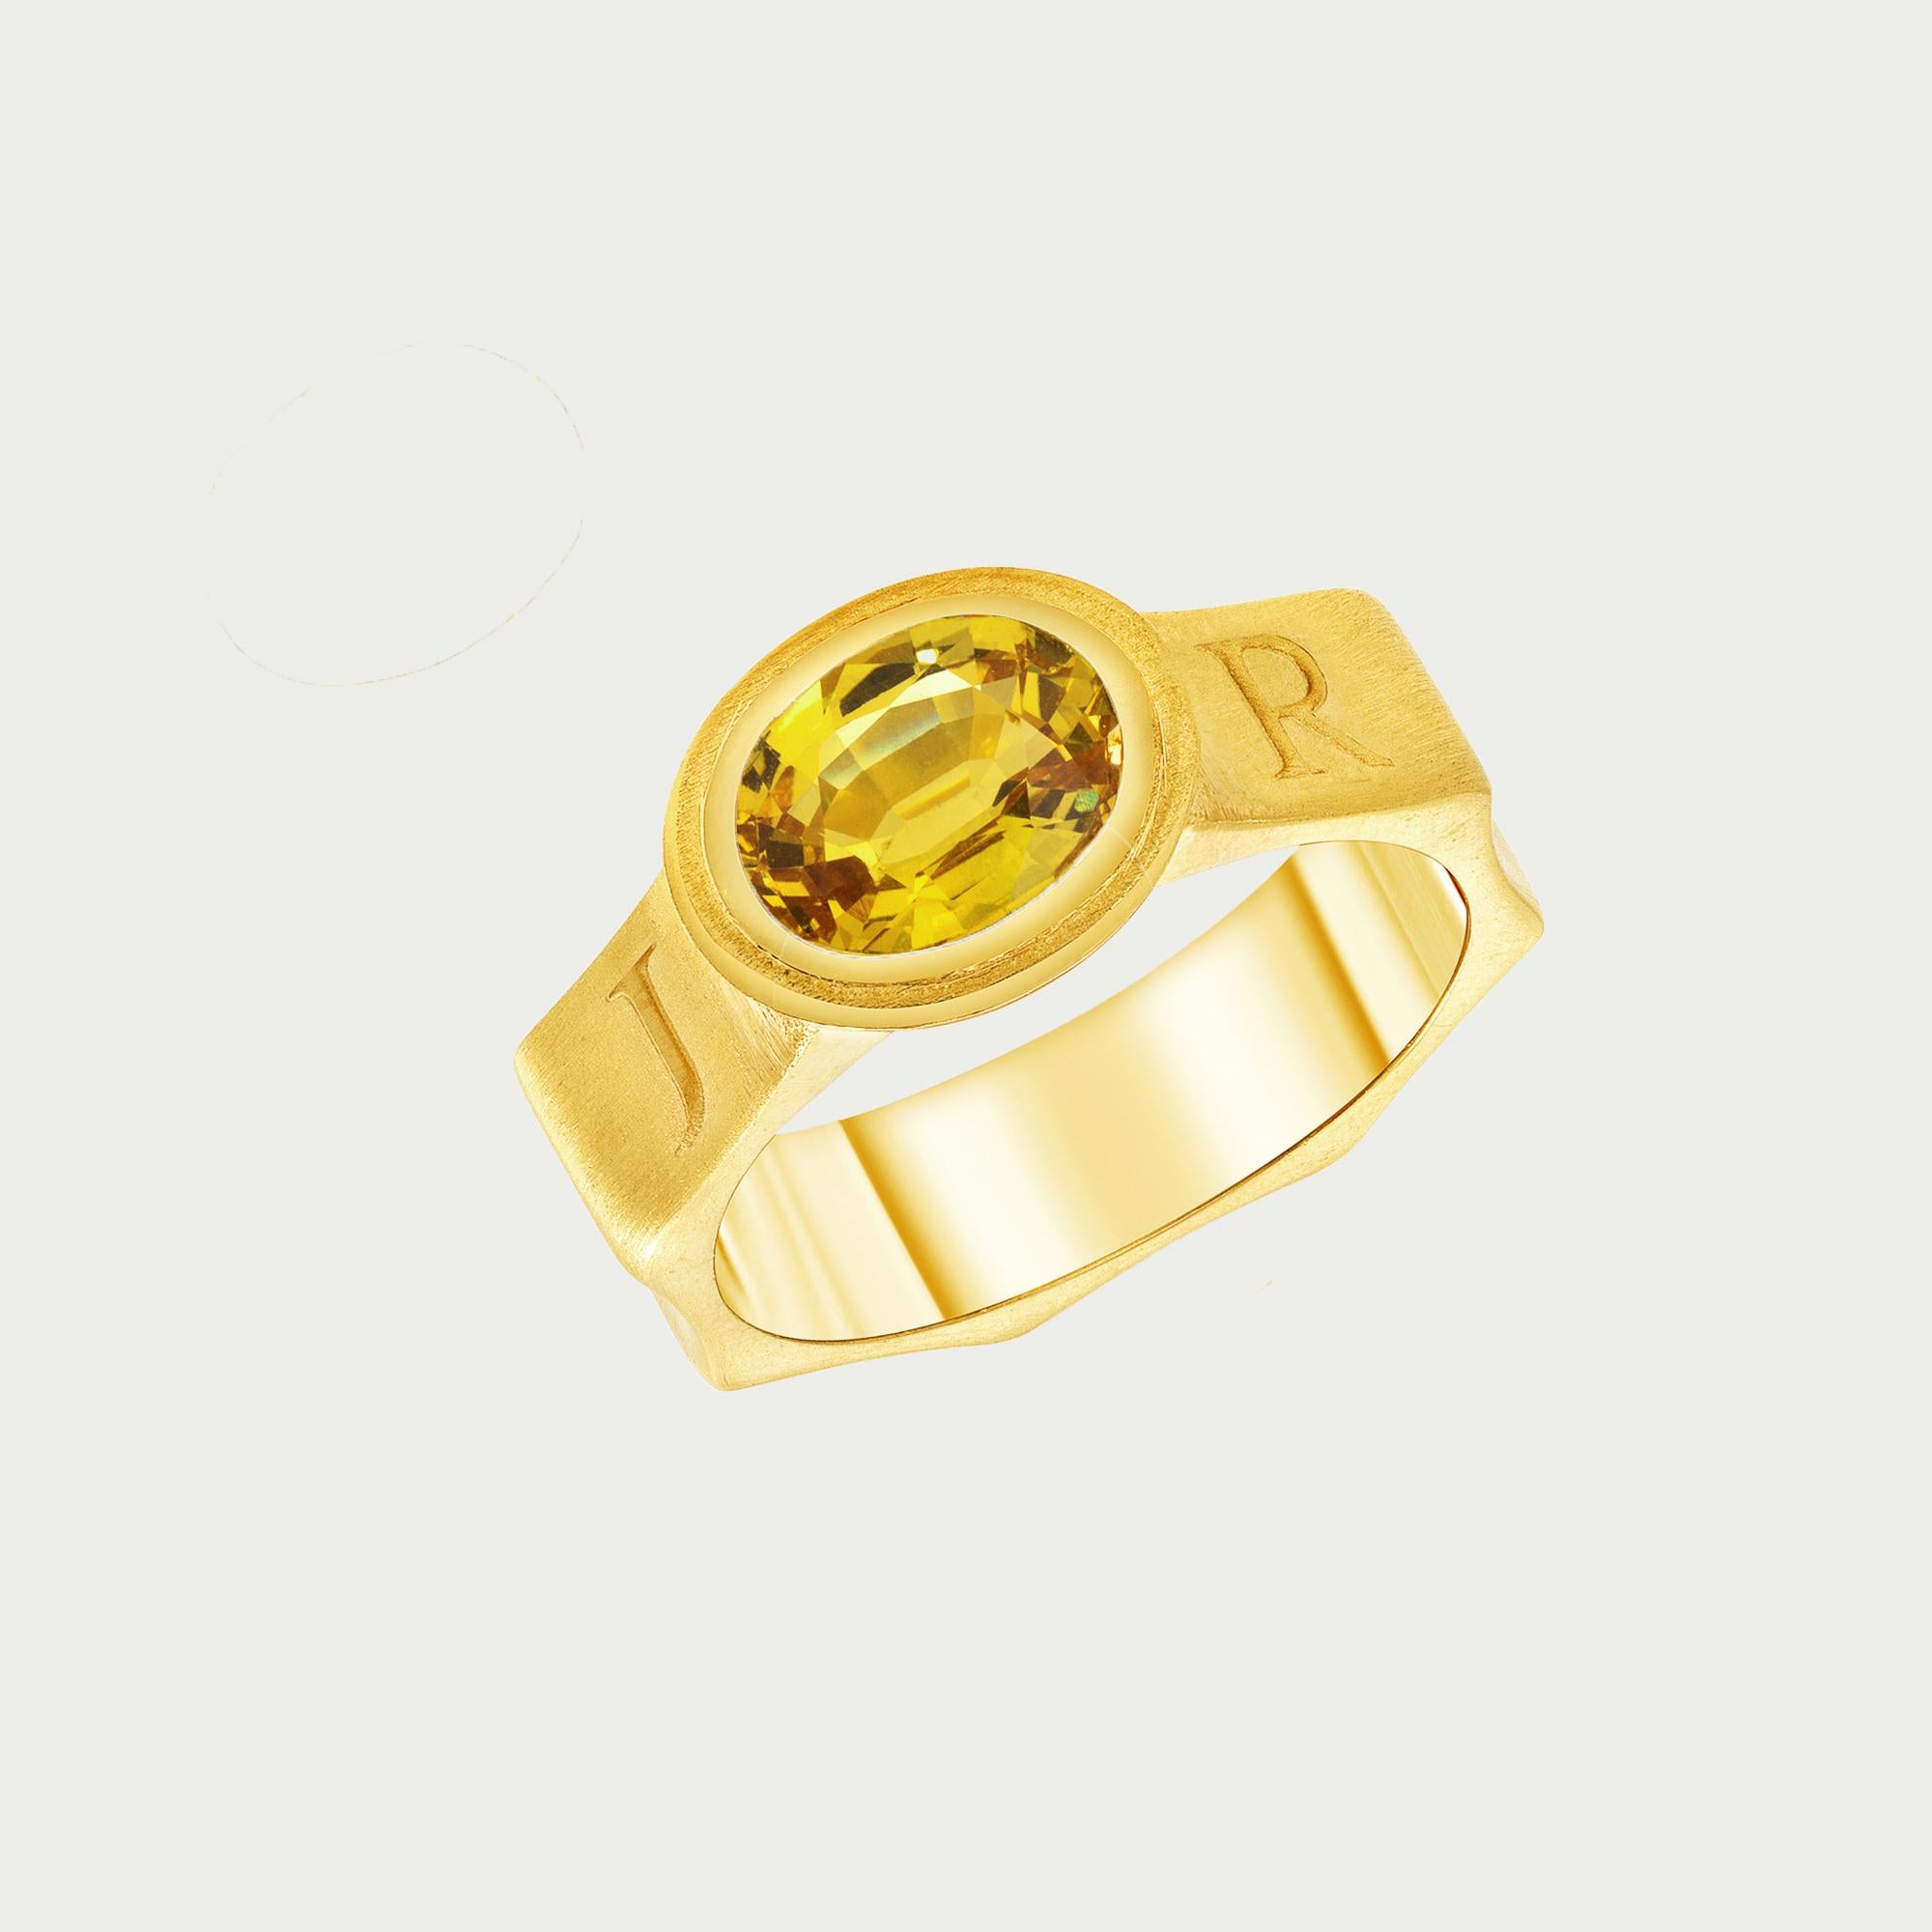 Yellow Sapphire Jyoti Ring In 14 Karat Yellow Gold 

This unique ring features a 2.3 carat oval shape yellow sapphire crafted into 14 karat yellow gold. The medieval style band is designed in an octagonal shape, and around the band is engraved